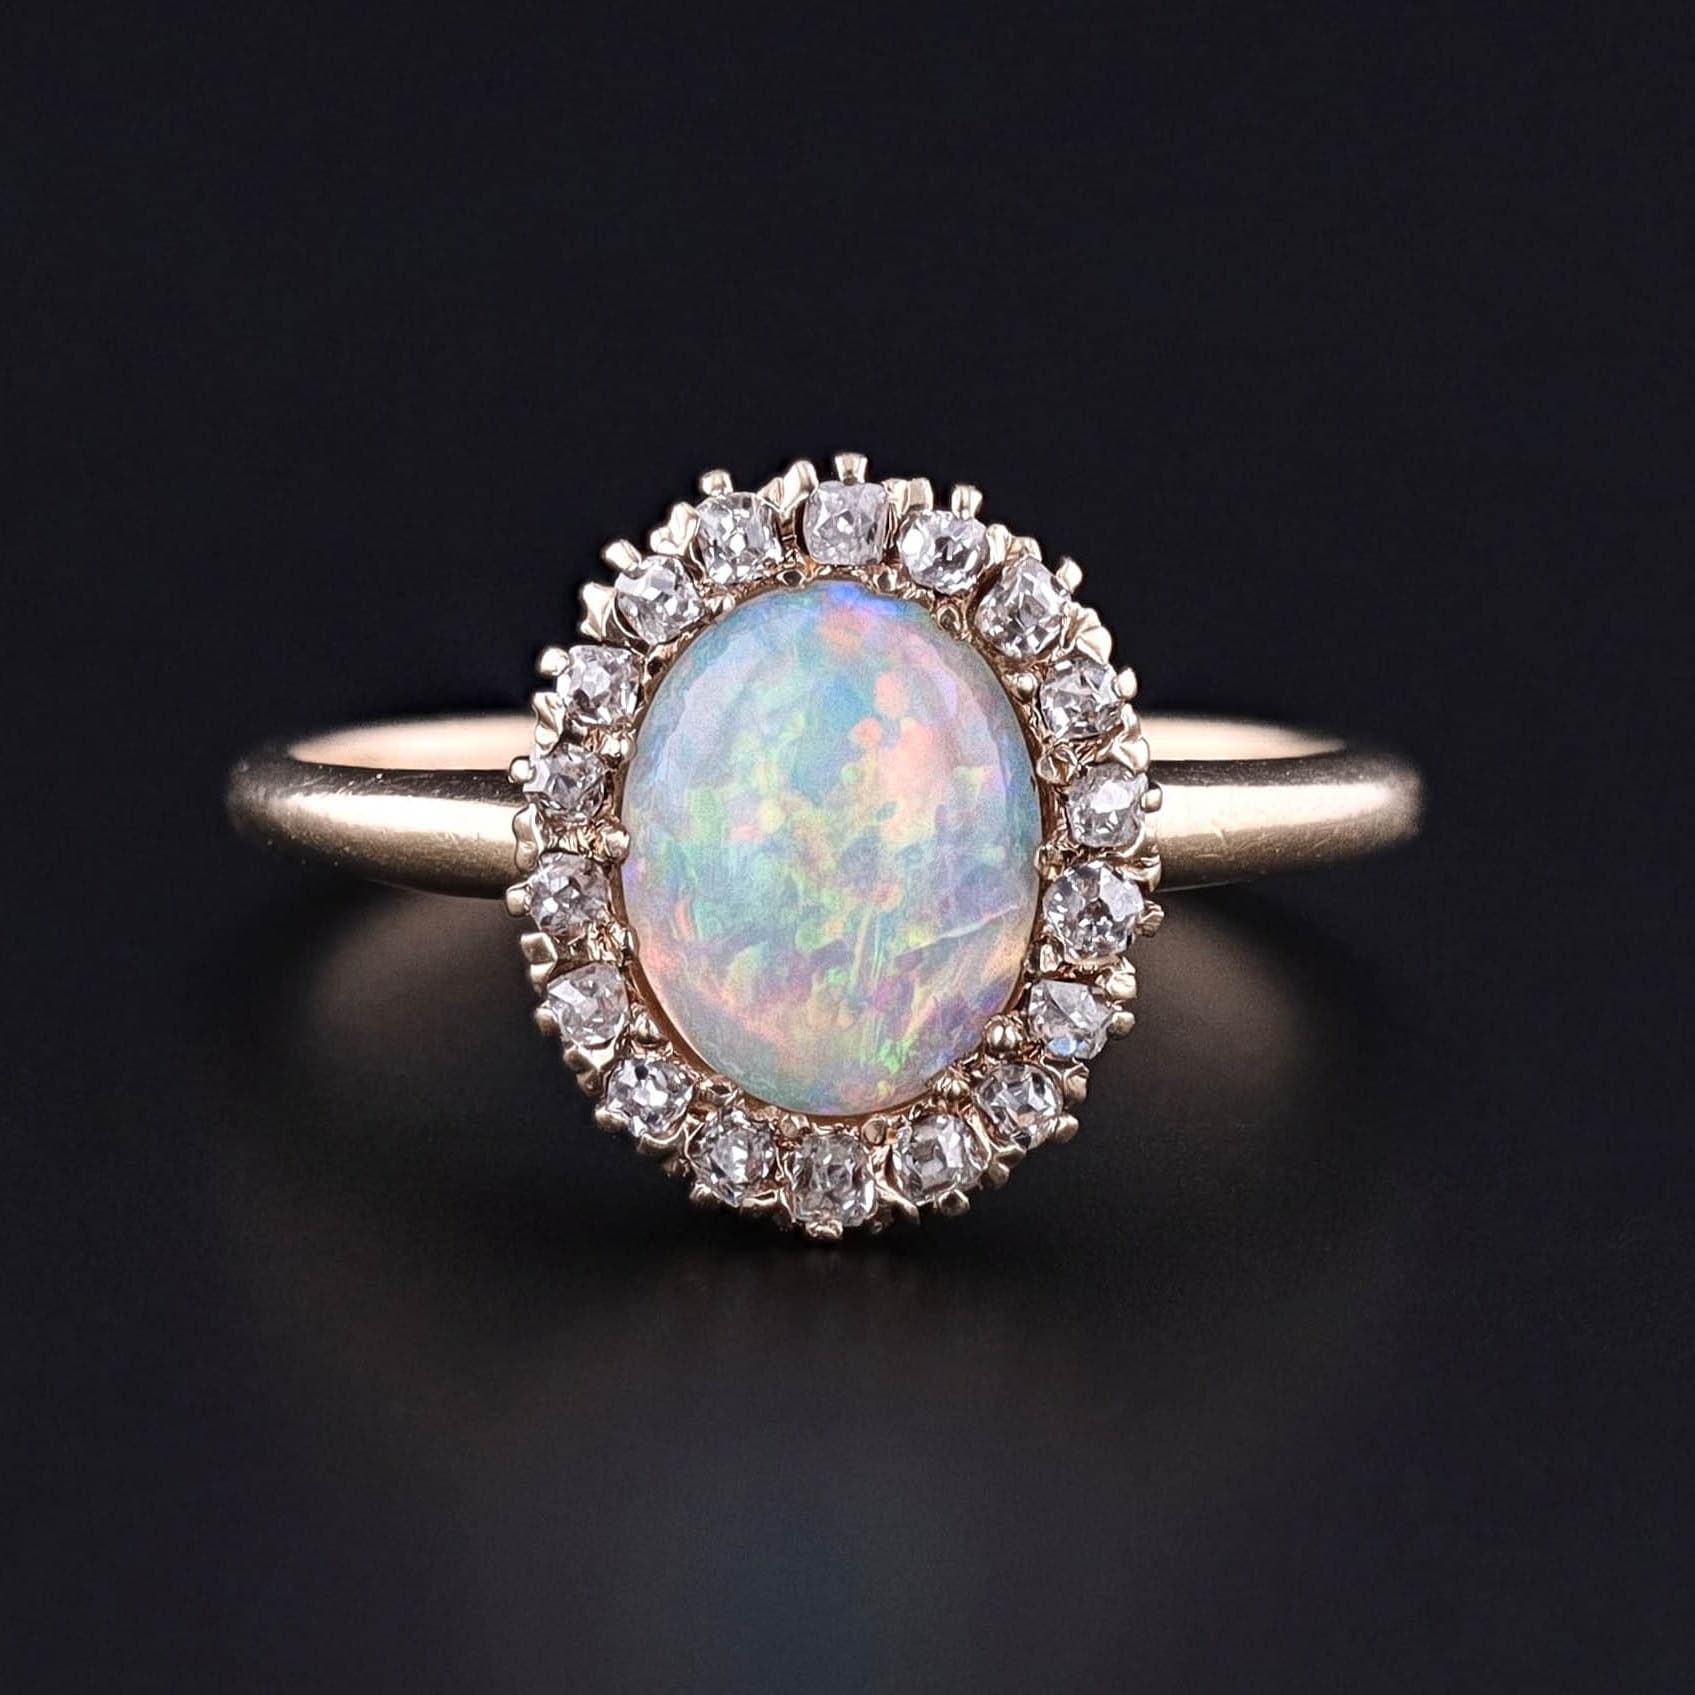 Antique Opal and Diamond Halo Ring of 14k Gold